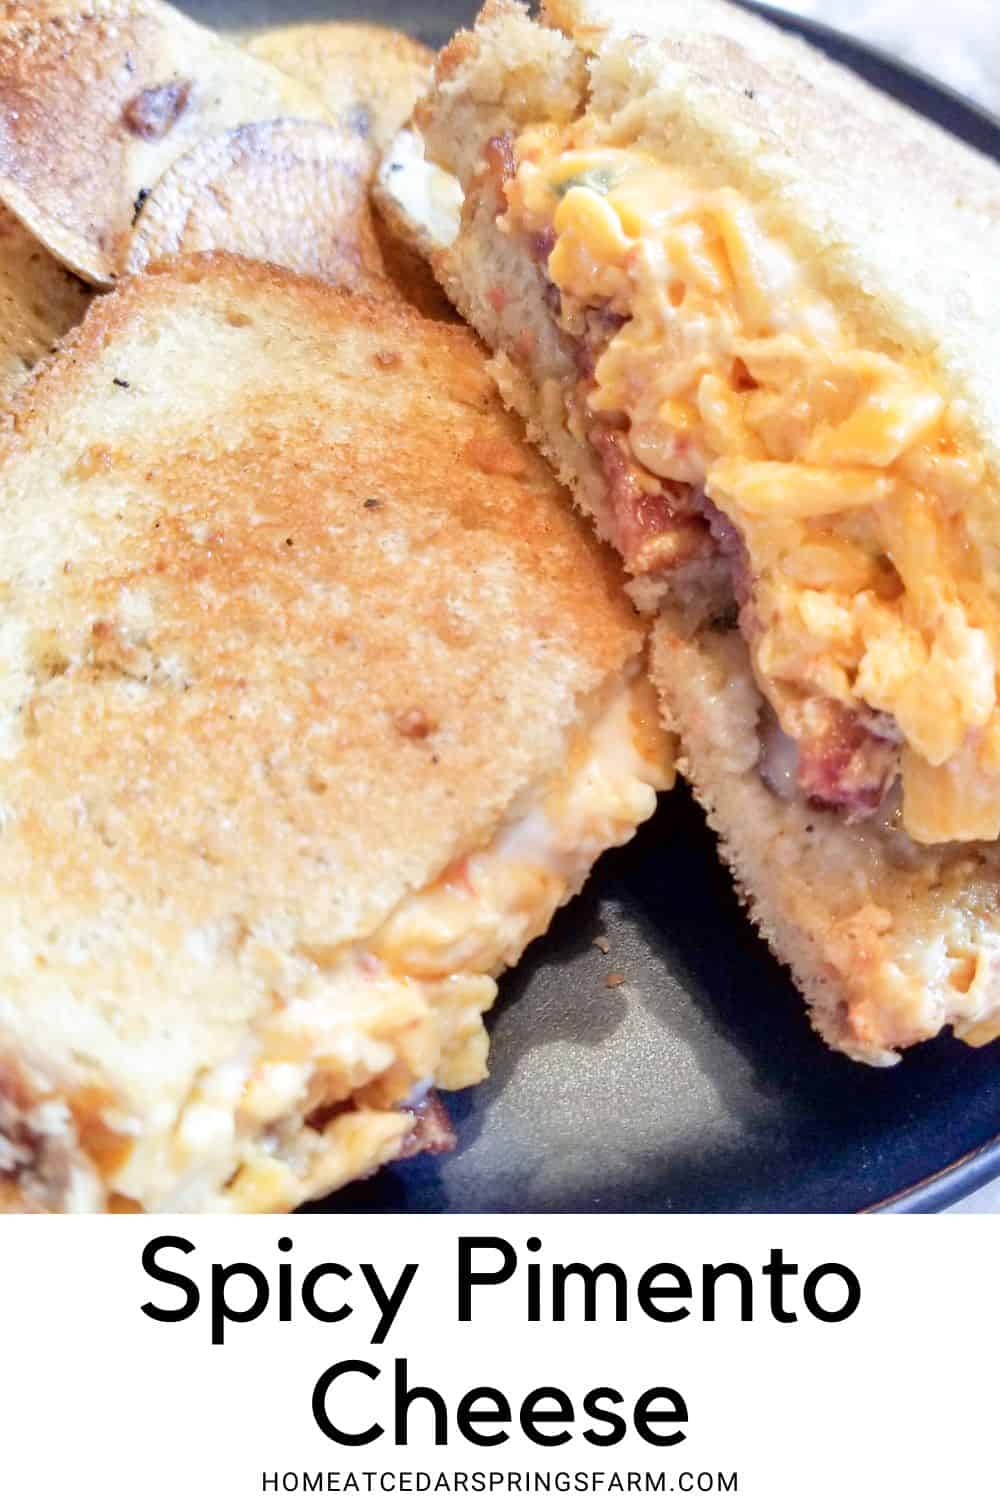 Southern Pimento Cheese Sandwich with text overlay.